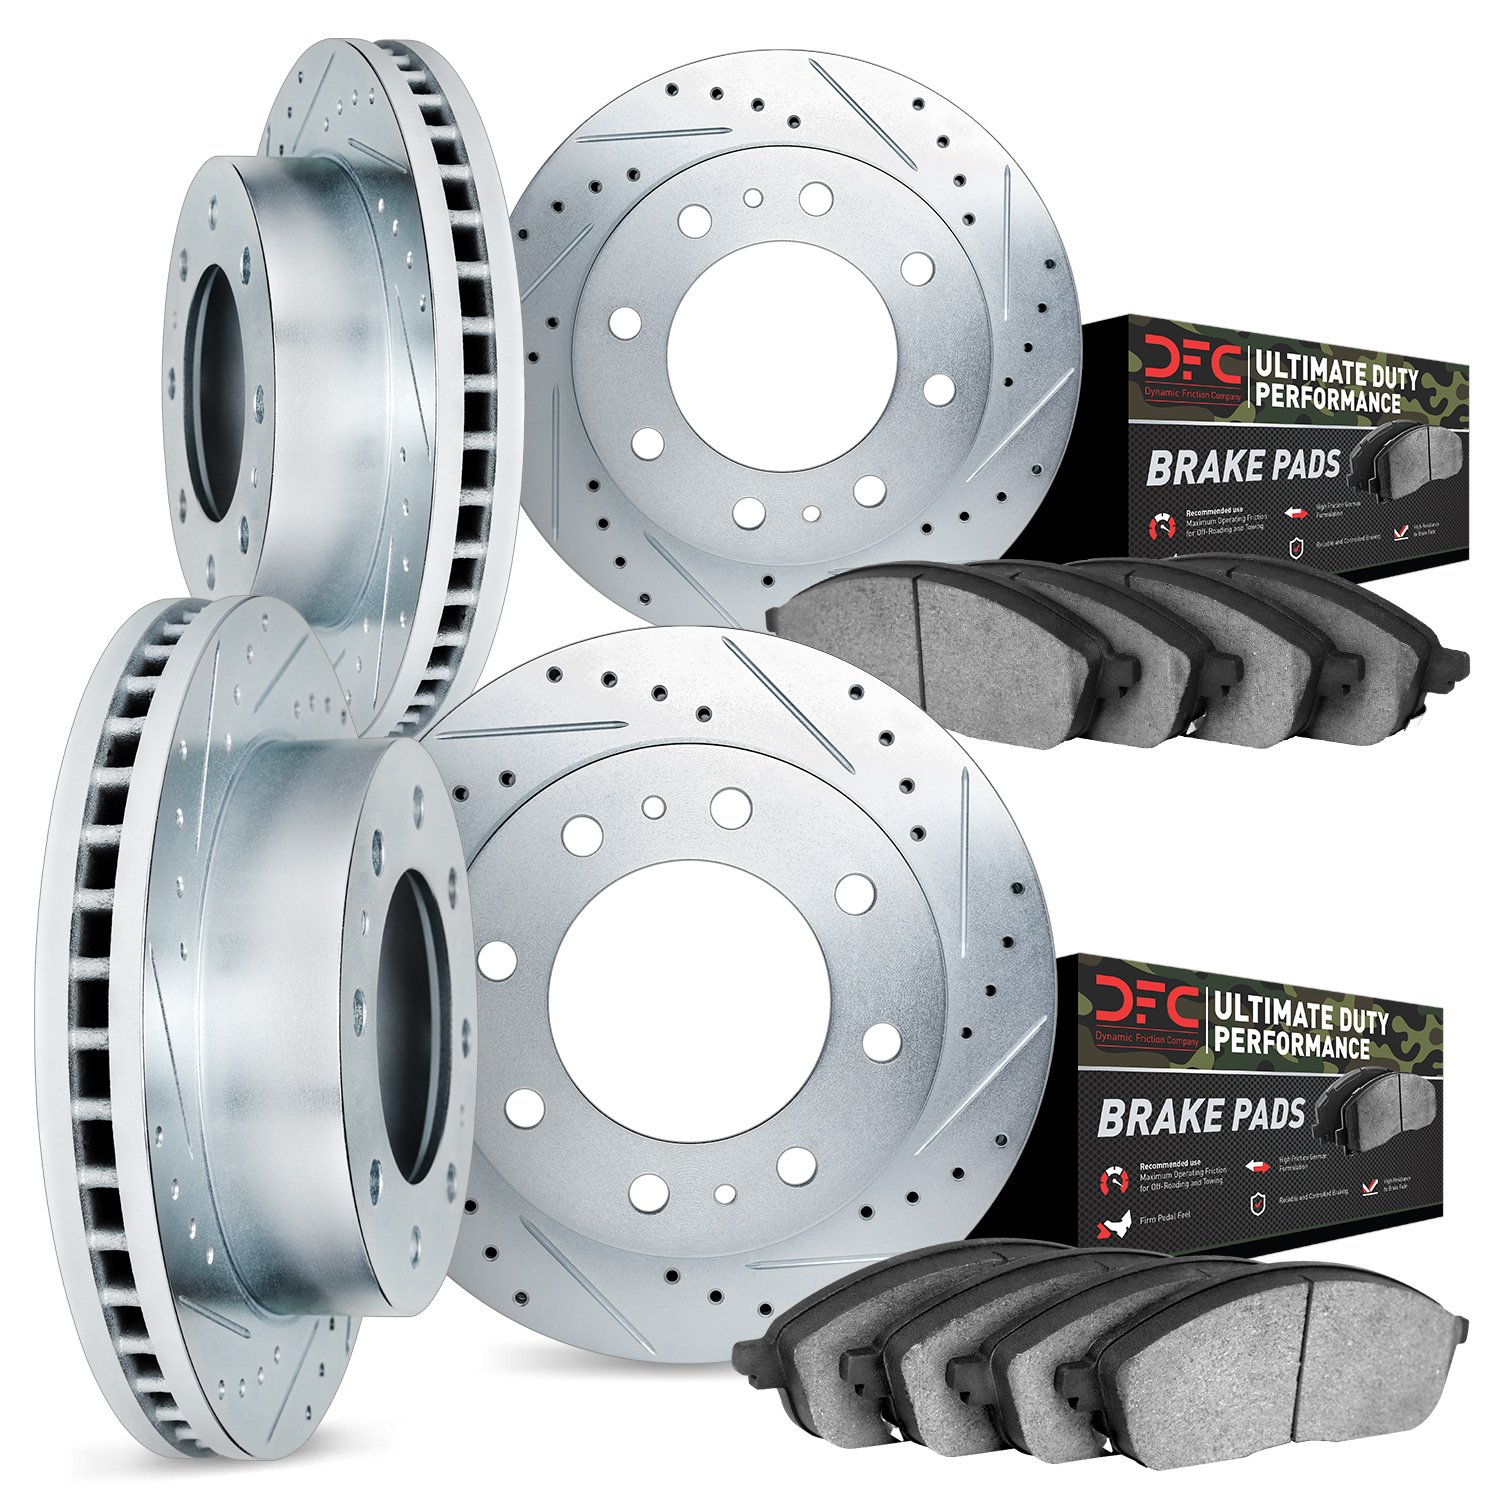 7404-54040 Drilled/Slotted Brake Rotors with Ultimate-Duty Brake Pads Kit [Silver], 2005-2007 Ford/Lincoln/Mercury/Mazda, Positi